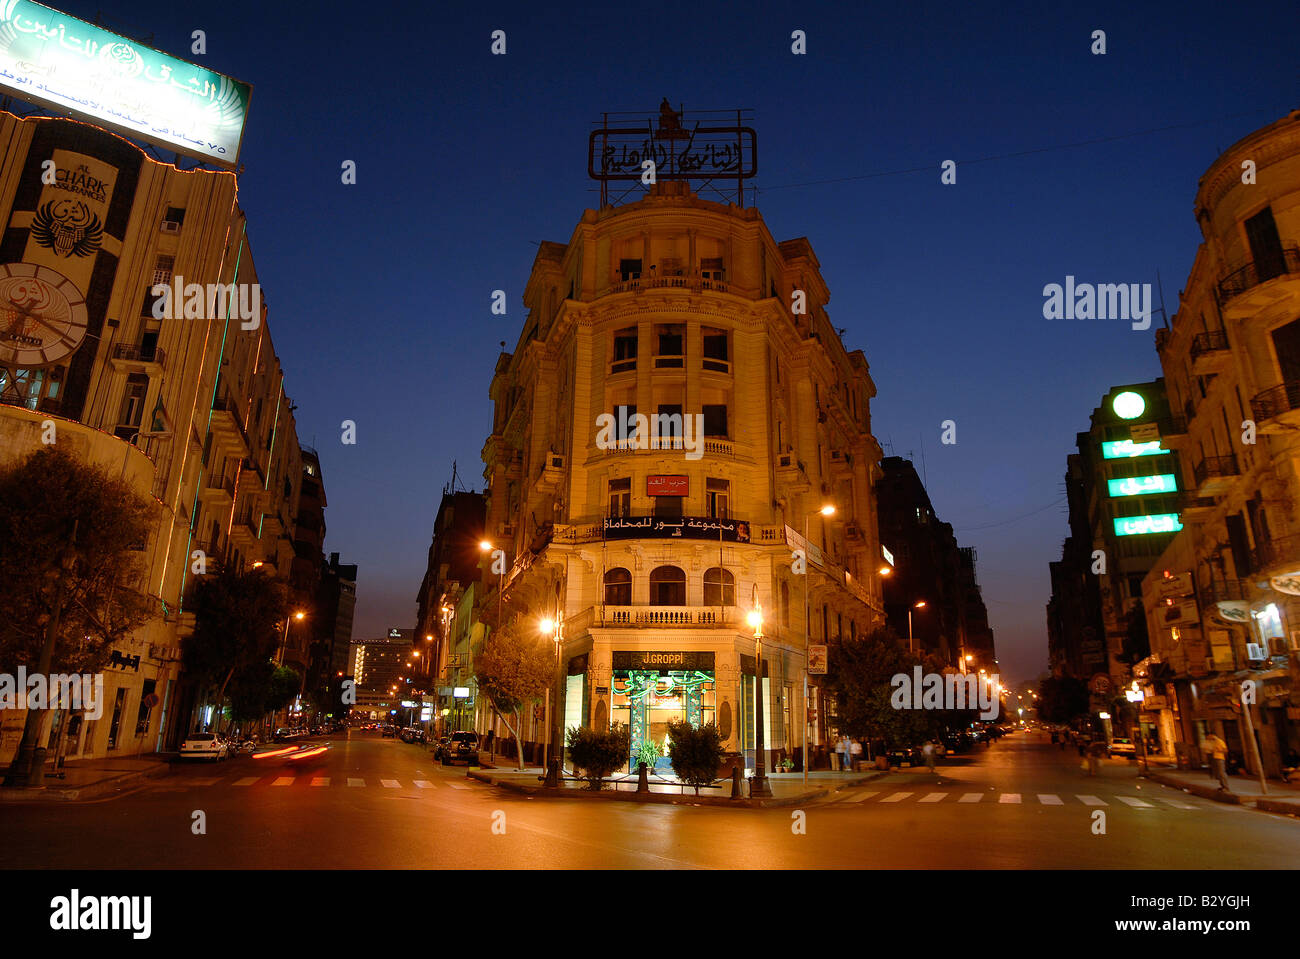 At night Cairo's colonial architecture looks best. Here coffehouse Groppi in downtown. Stock Photo